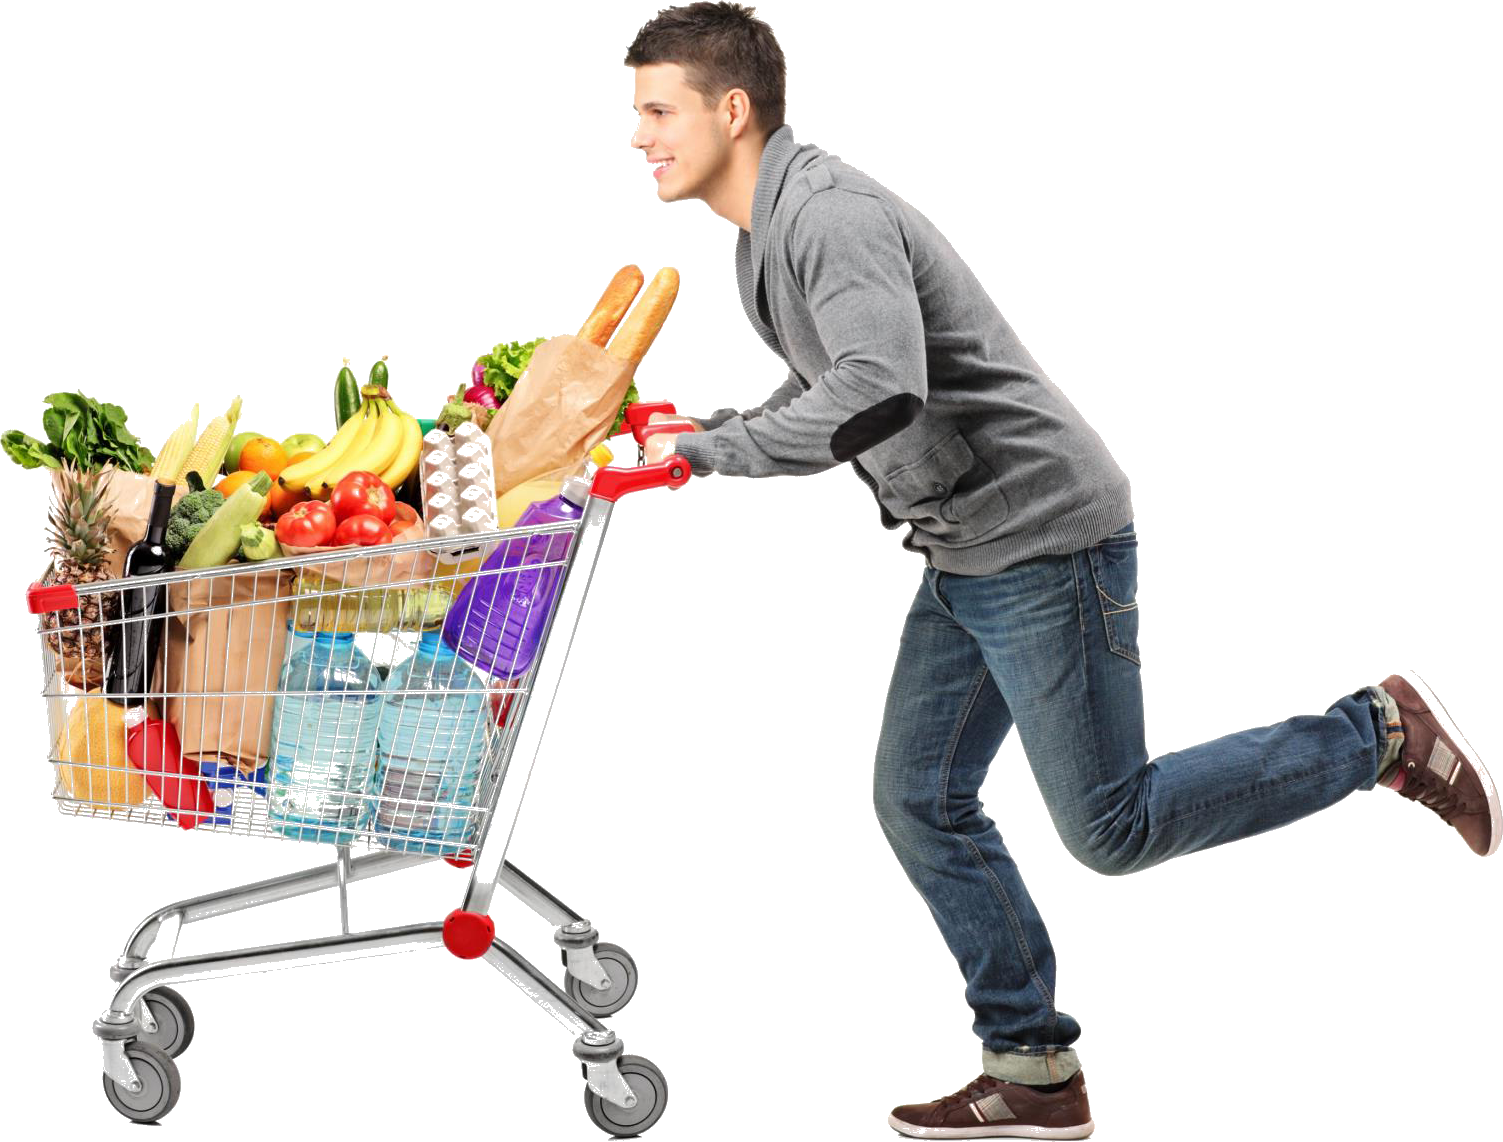 A Man Running With A Shopping Cart Full Of Food